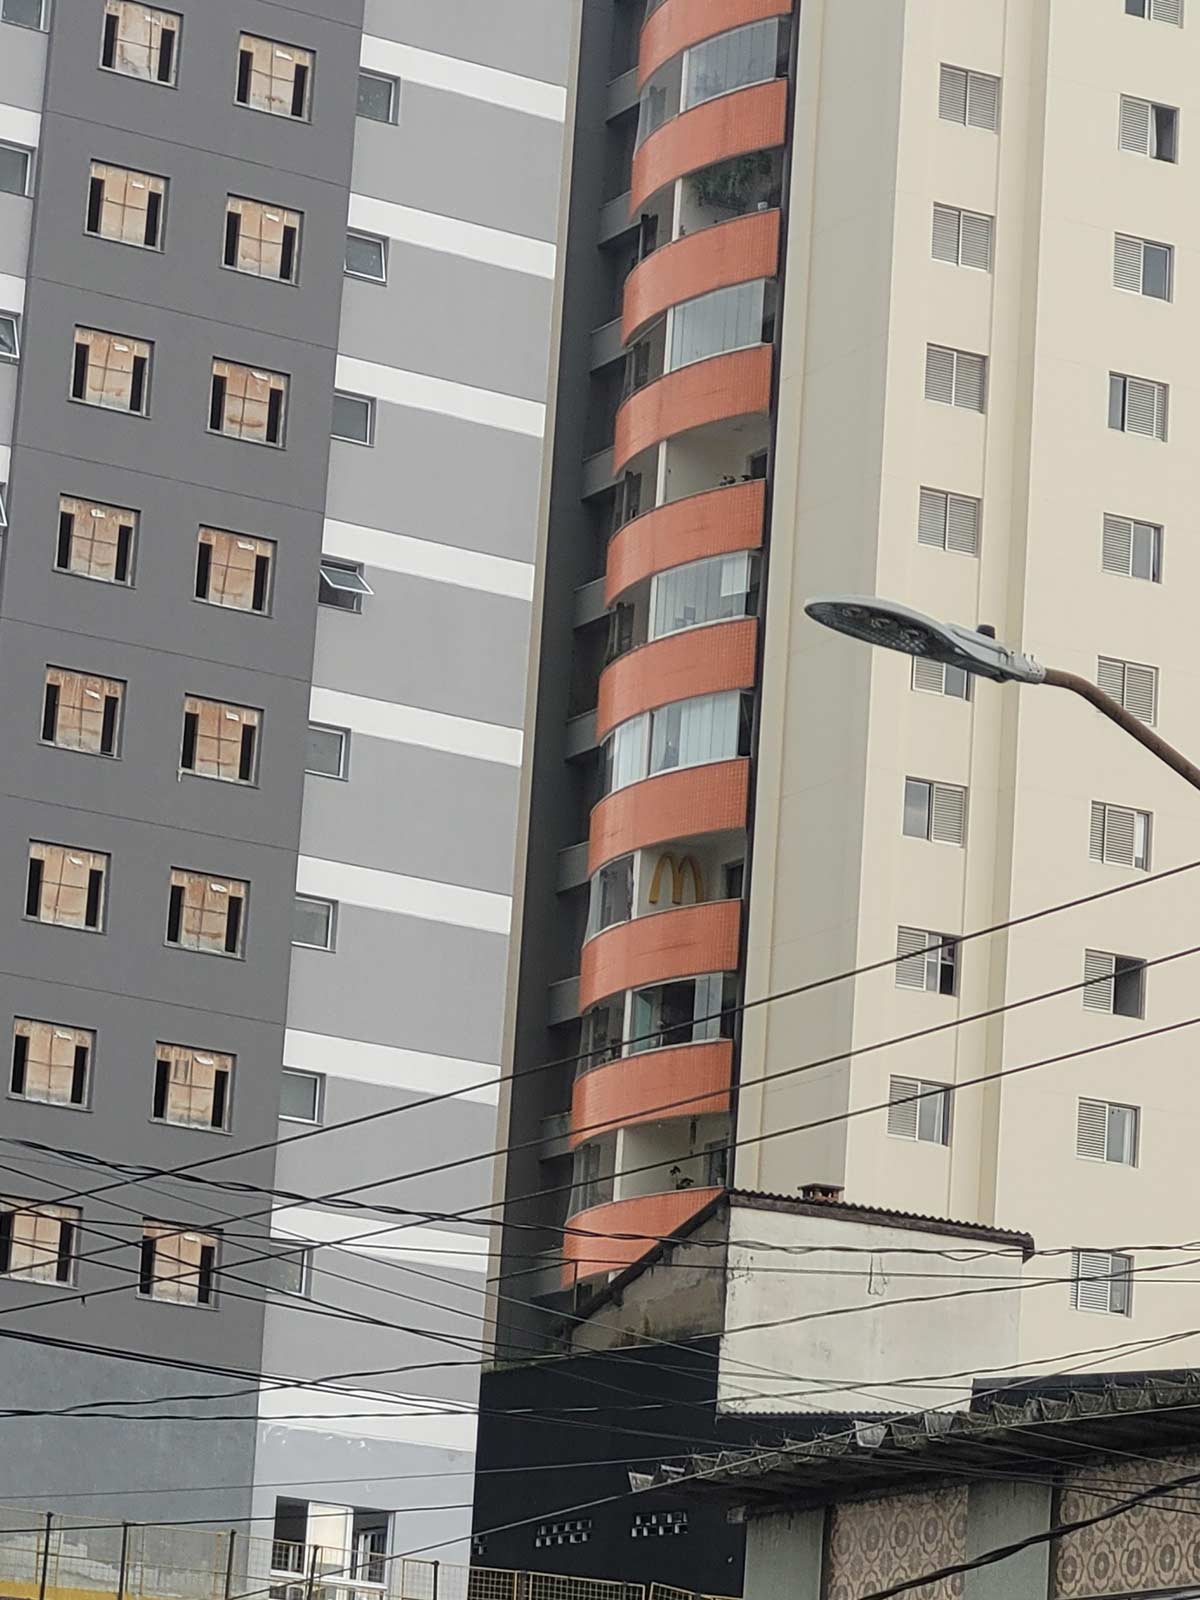 There's an apartment near my house with a McDonald's logo in their balcony. (Brazil)